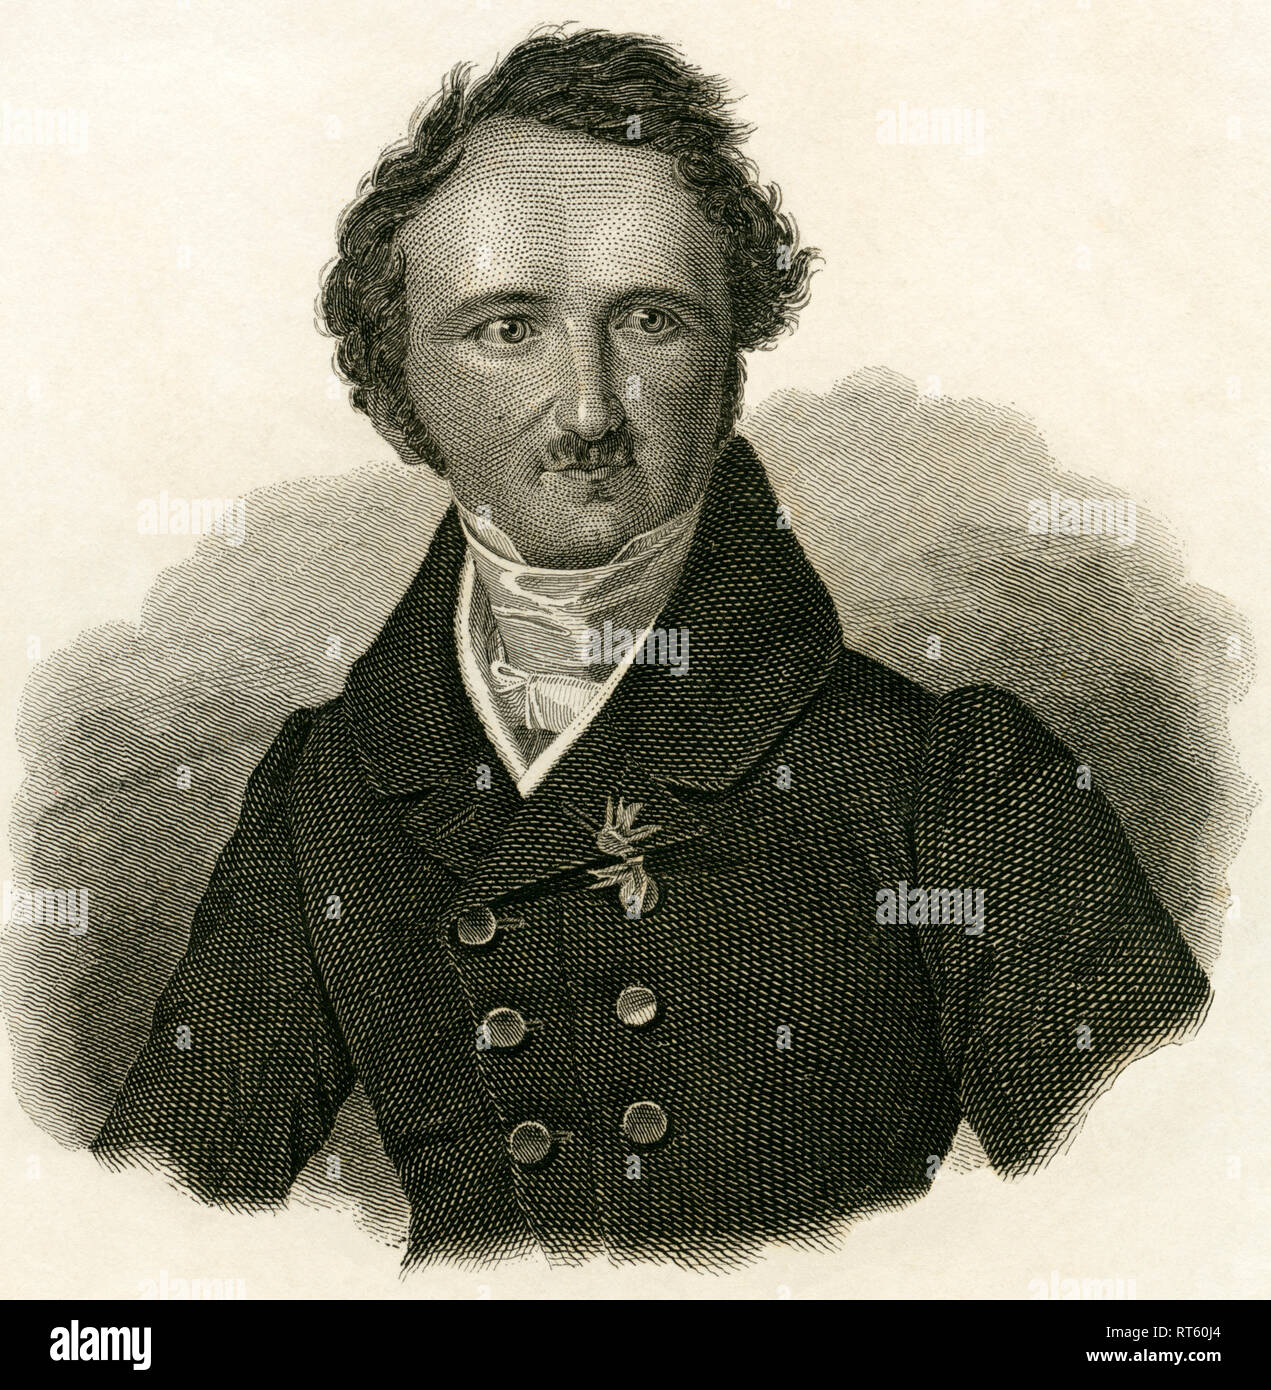 Hermann Prince von Pückler-Muskau, a German nobleman, landscape architect, author and Lieutenant general, steel engraving by Jaquemot, published by W. Creuzbauer, Karlsruhe, around 1840., Artist's Copyright has not to be cleared Stock Photo